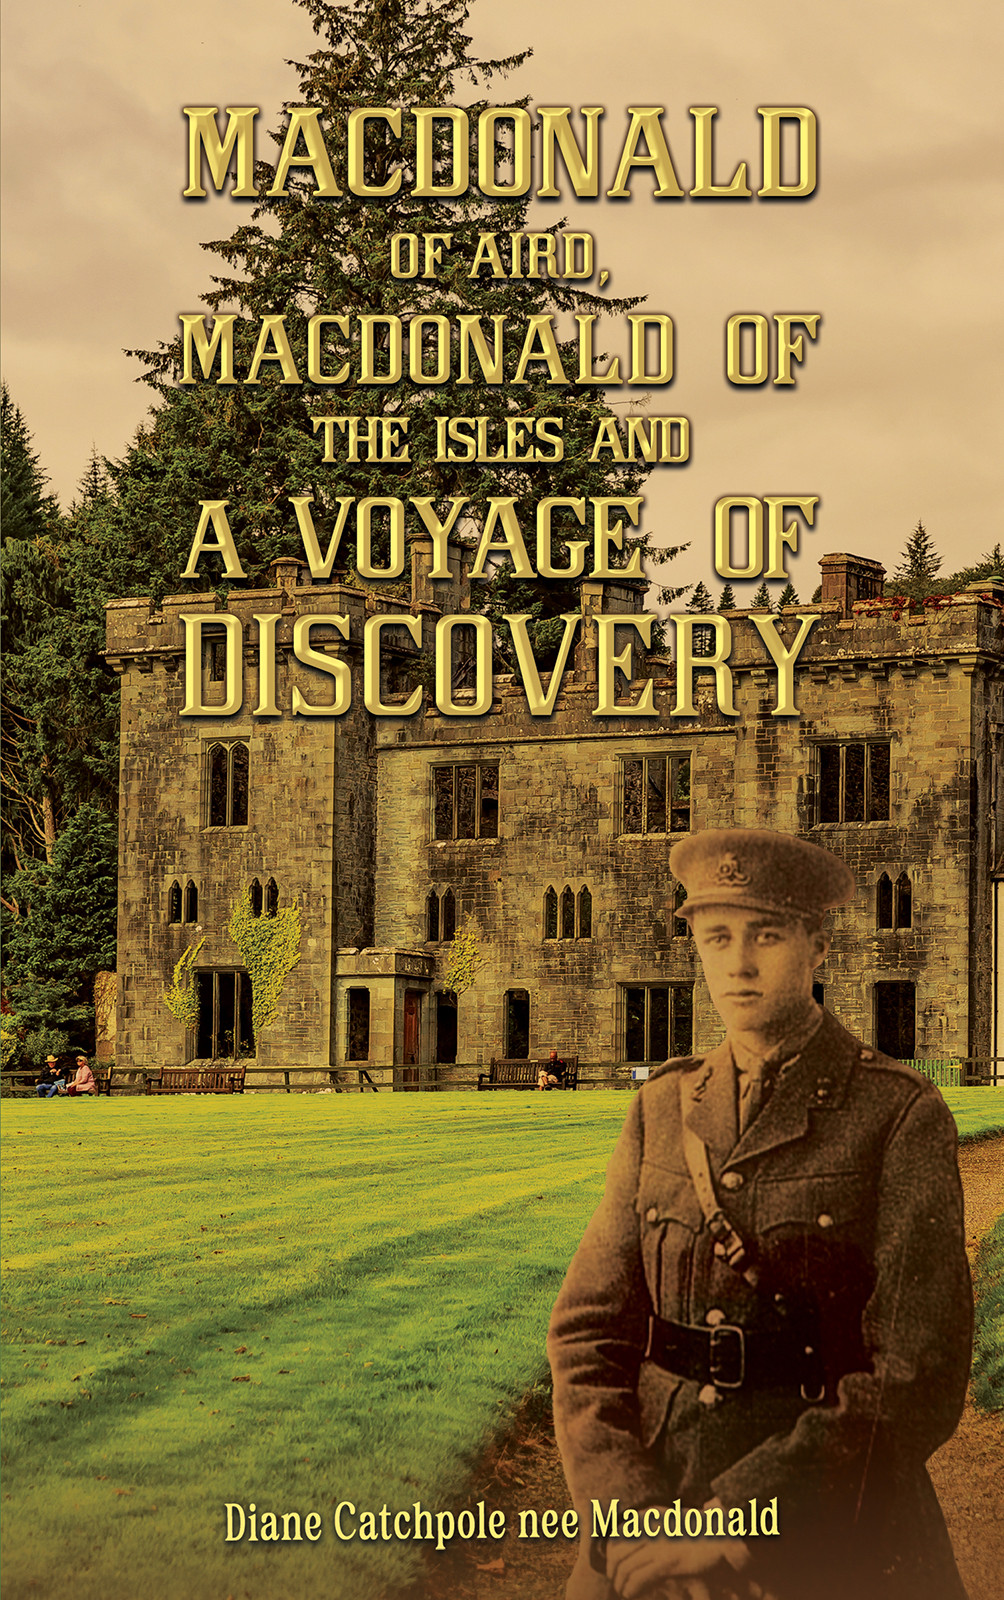 Macdonald of Aird, Macdonald of the Isles and A Voyage of Discovery